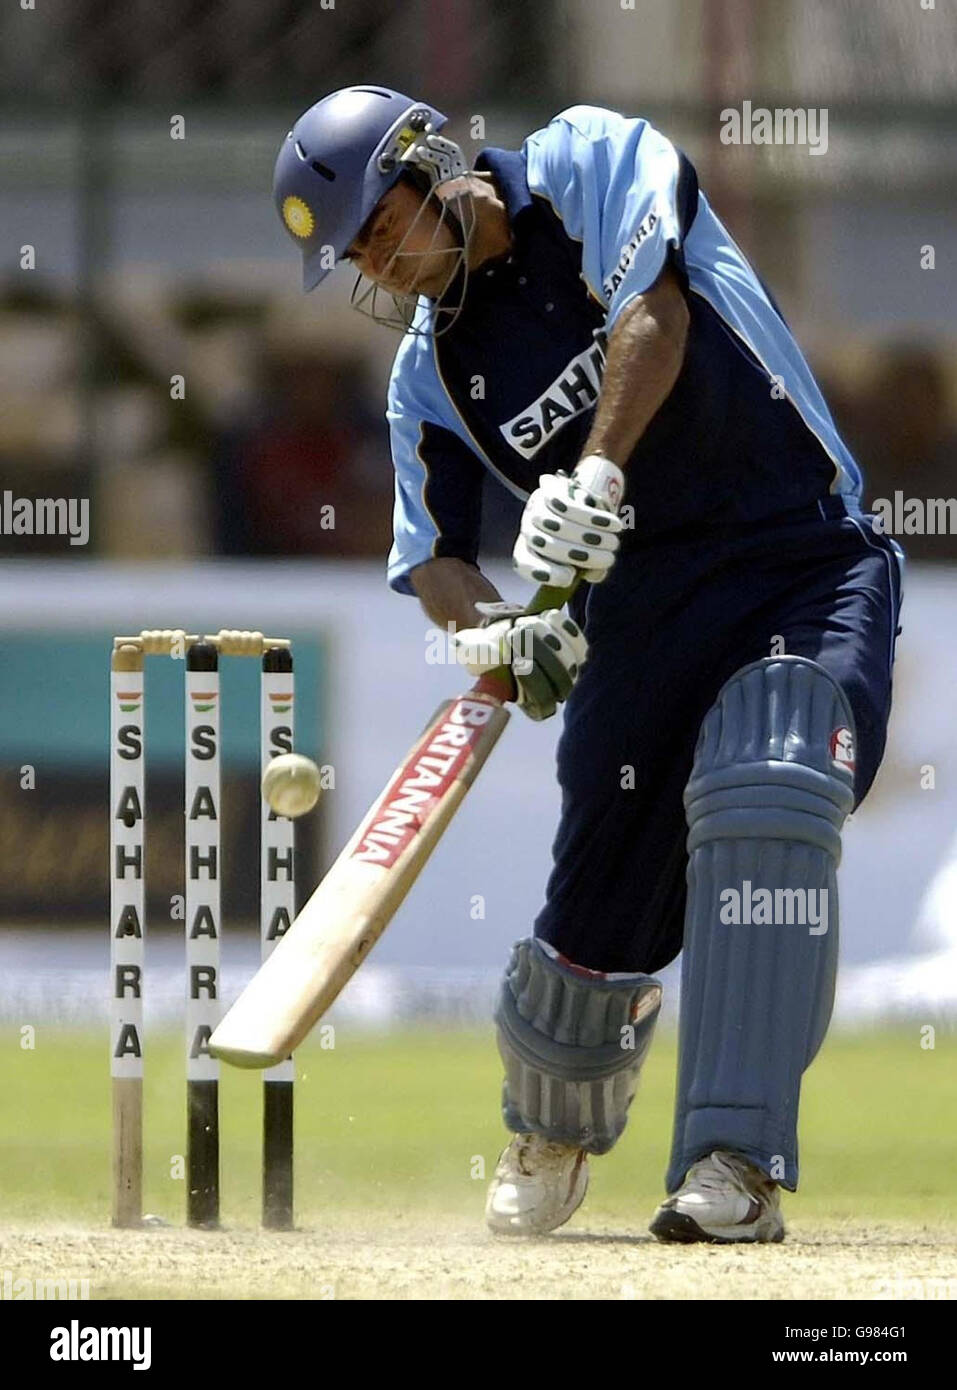 Indian batsman Mohammad Kaif hits the ball for 4 runs during the one-day tour match against RCA President's XI at the Sawai Mansingh Stadium in Jaipur, India, Saturday March 25, 2006. PRESS ASSOCIATION Photo. Photo credit should read: Rebecca Naden/PA. Stock Photo